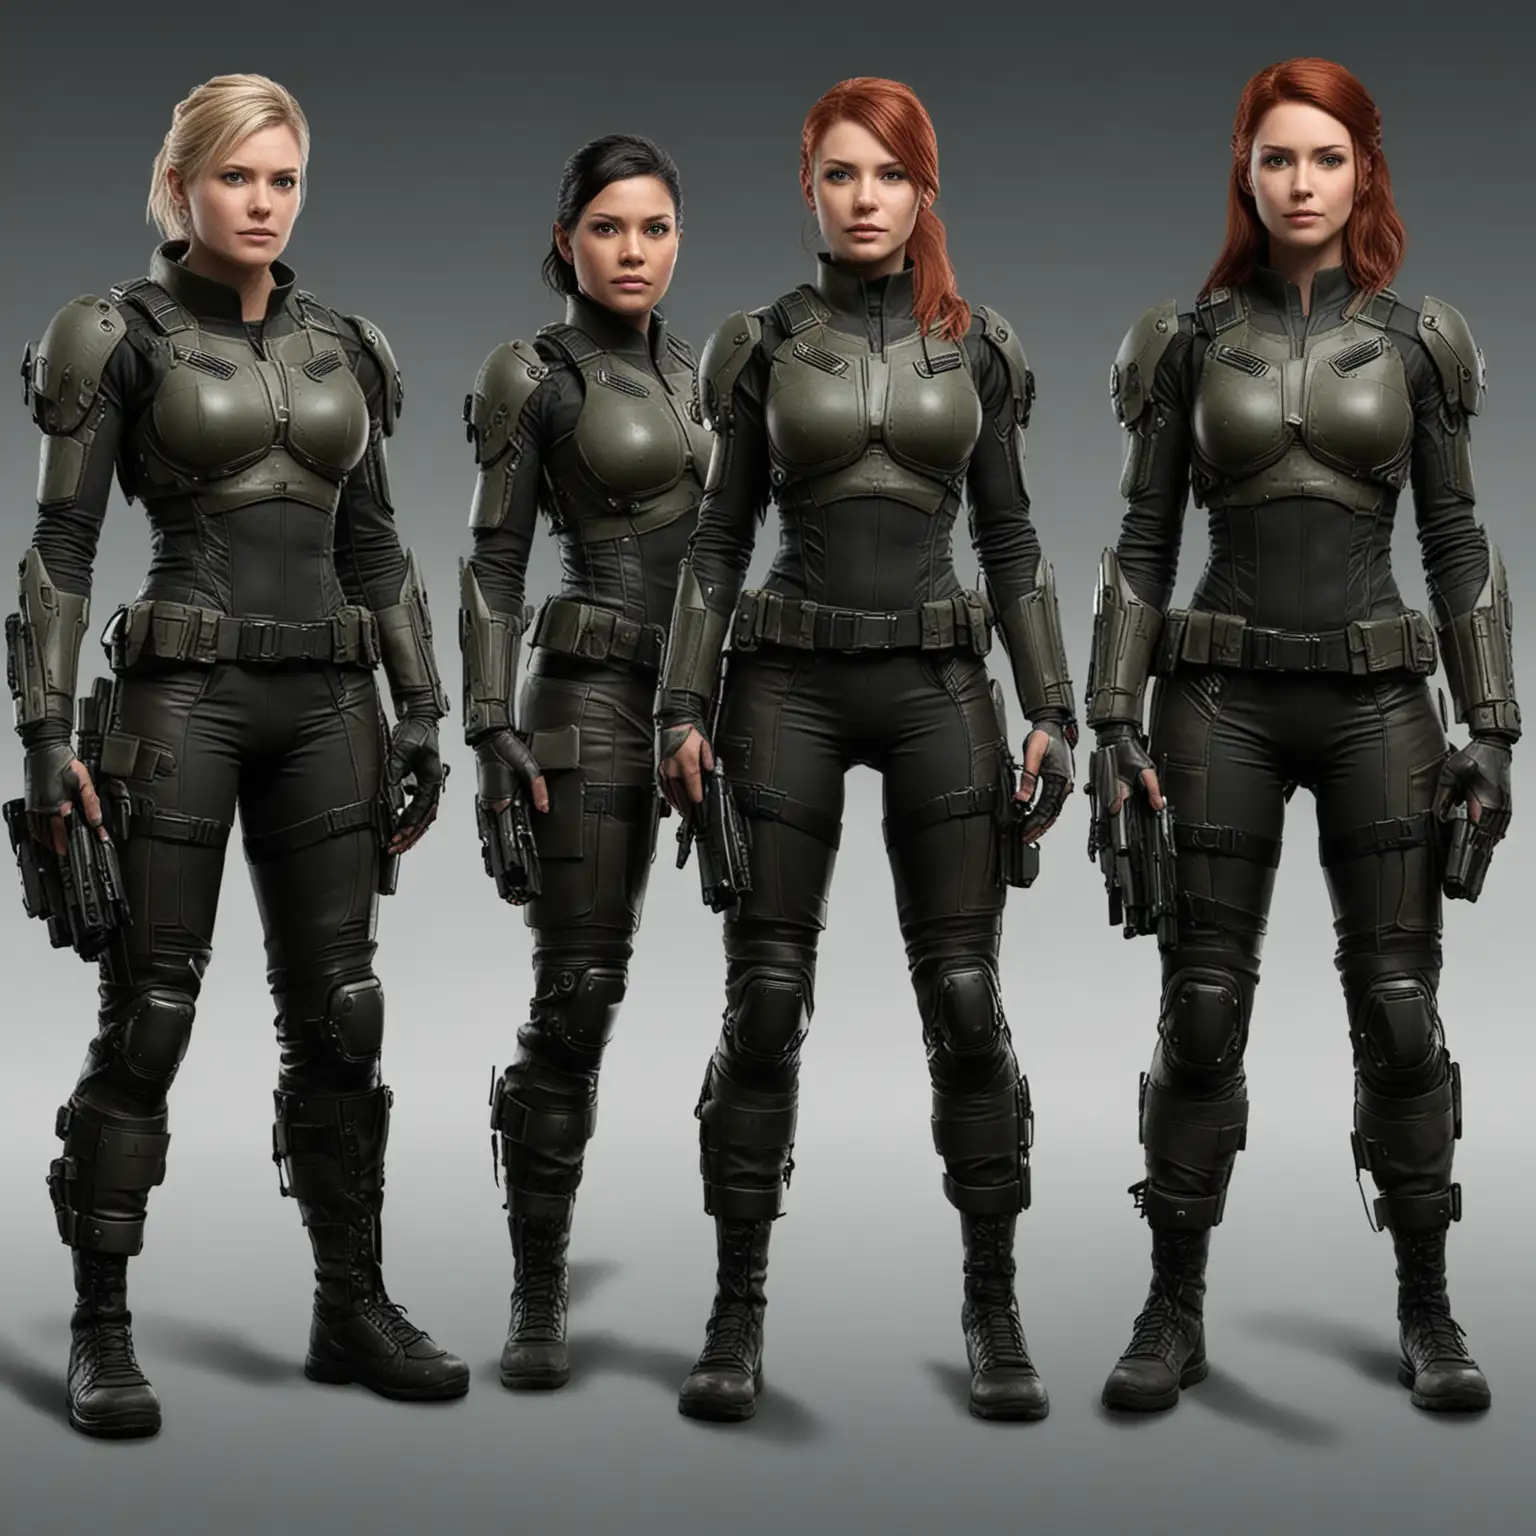 SciFi-Tactical-Future-Team-in-Action